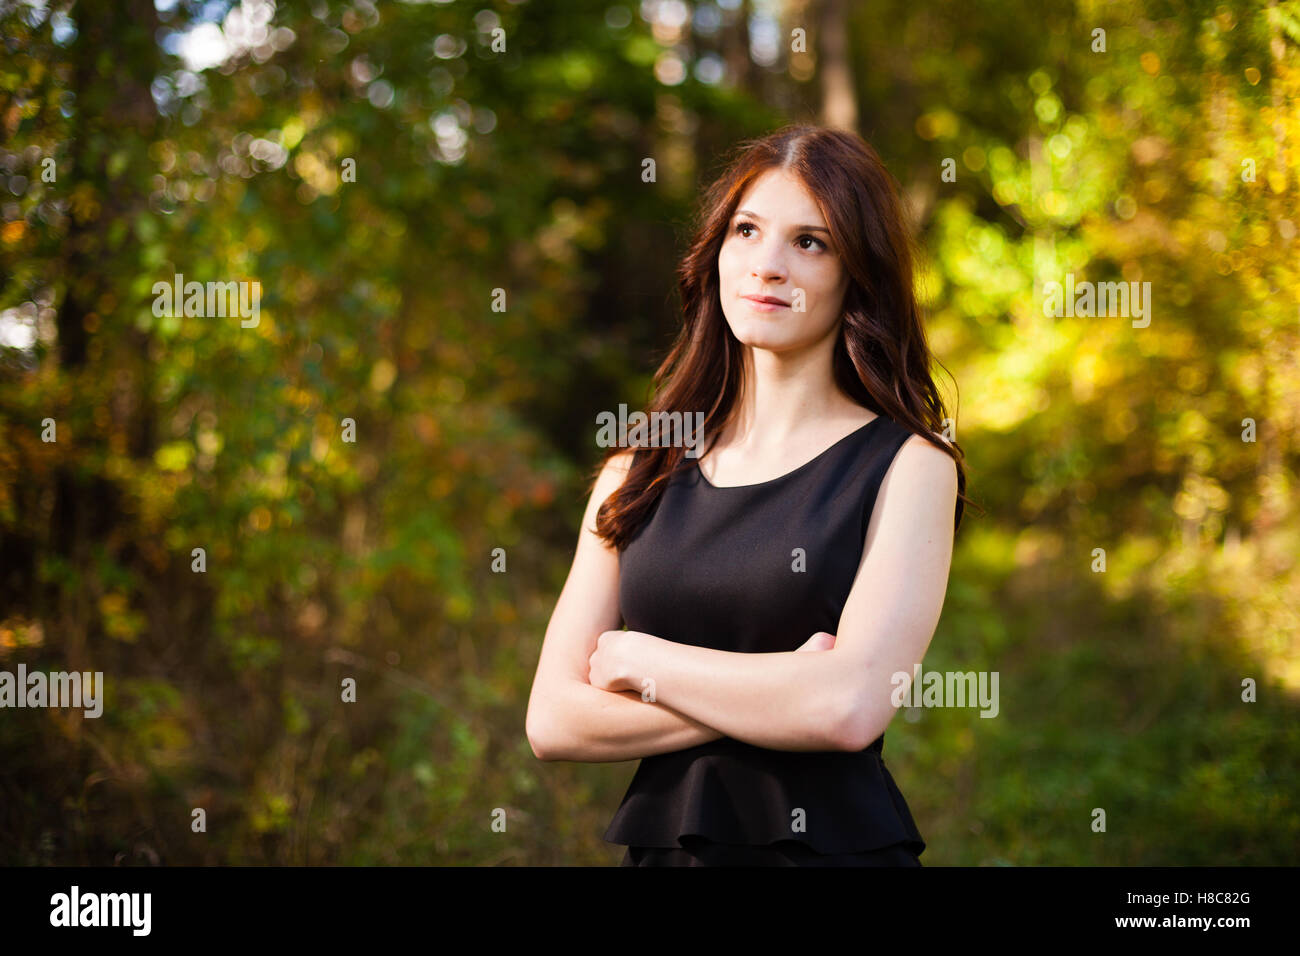 Long hair girl in a dress at forest. Stock Photo